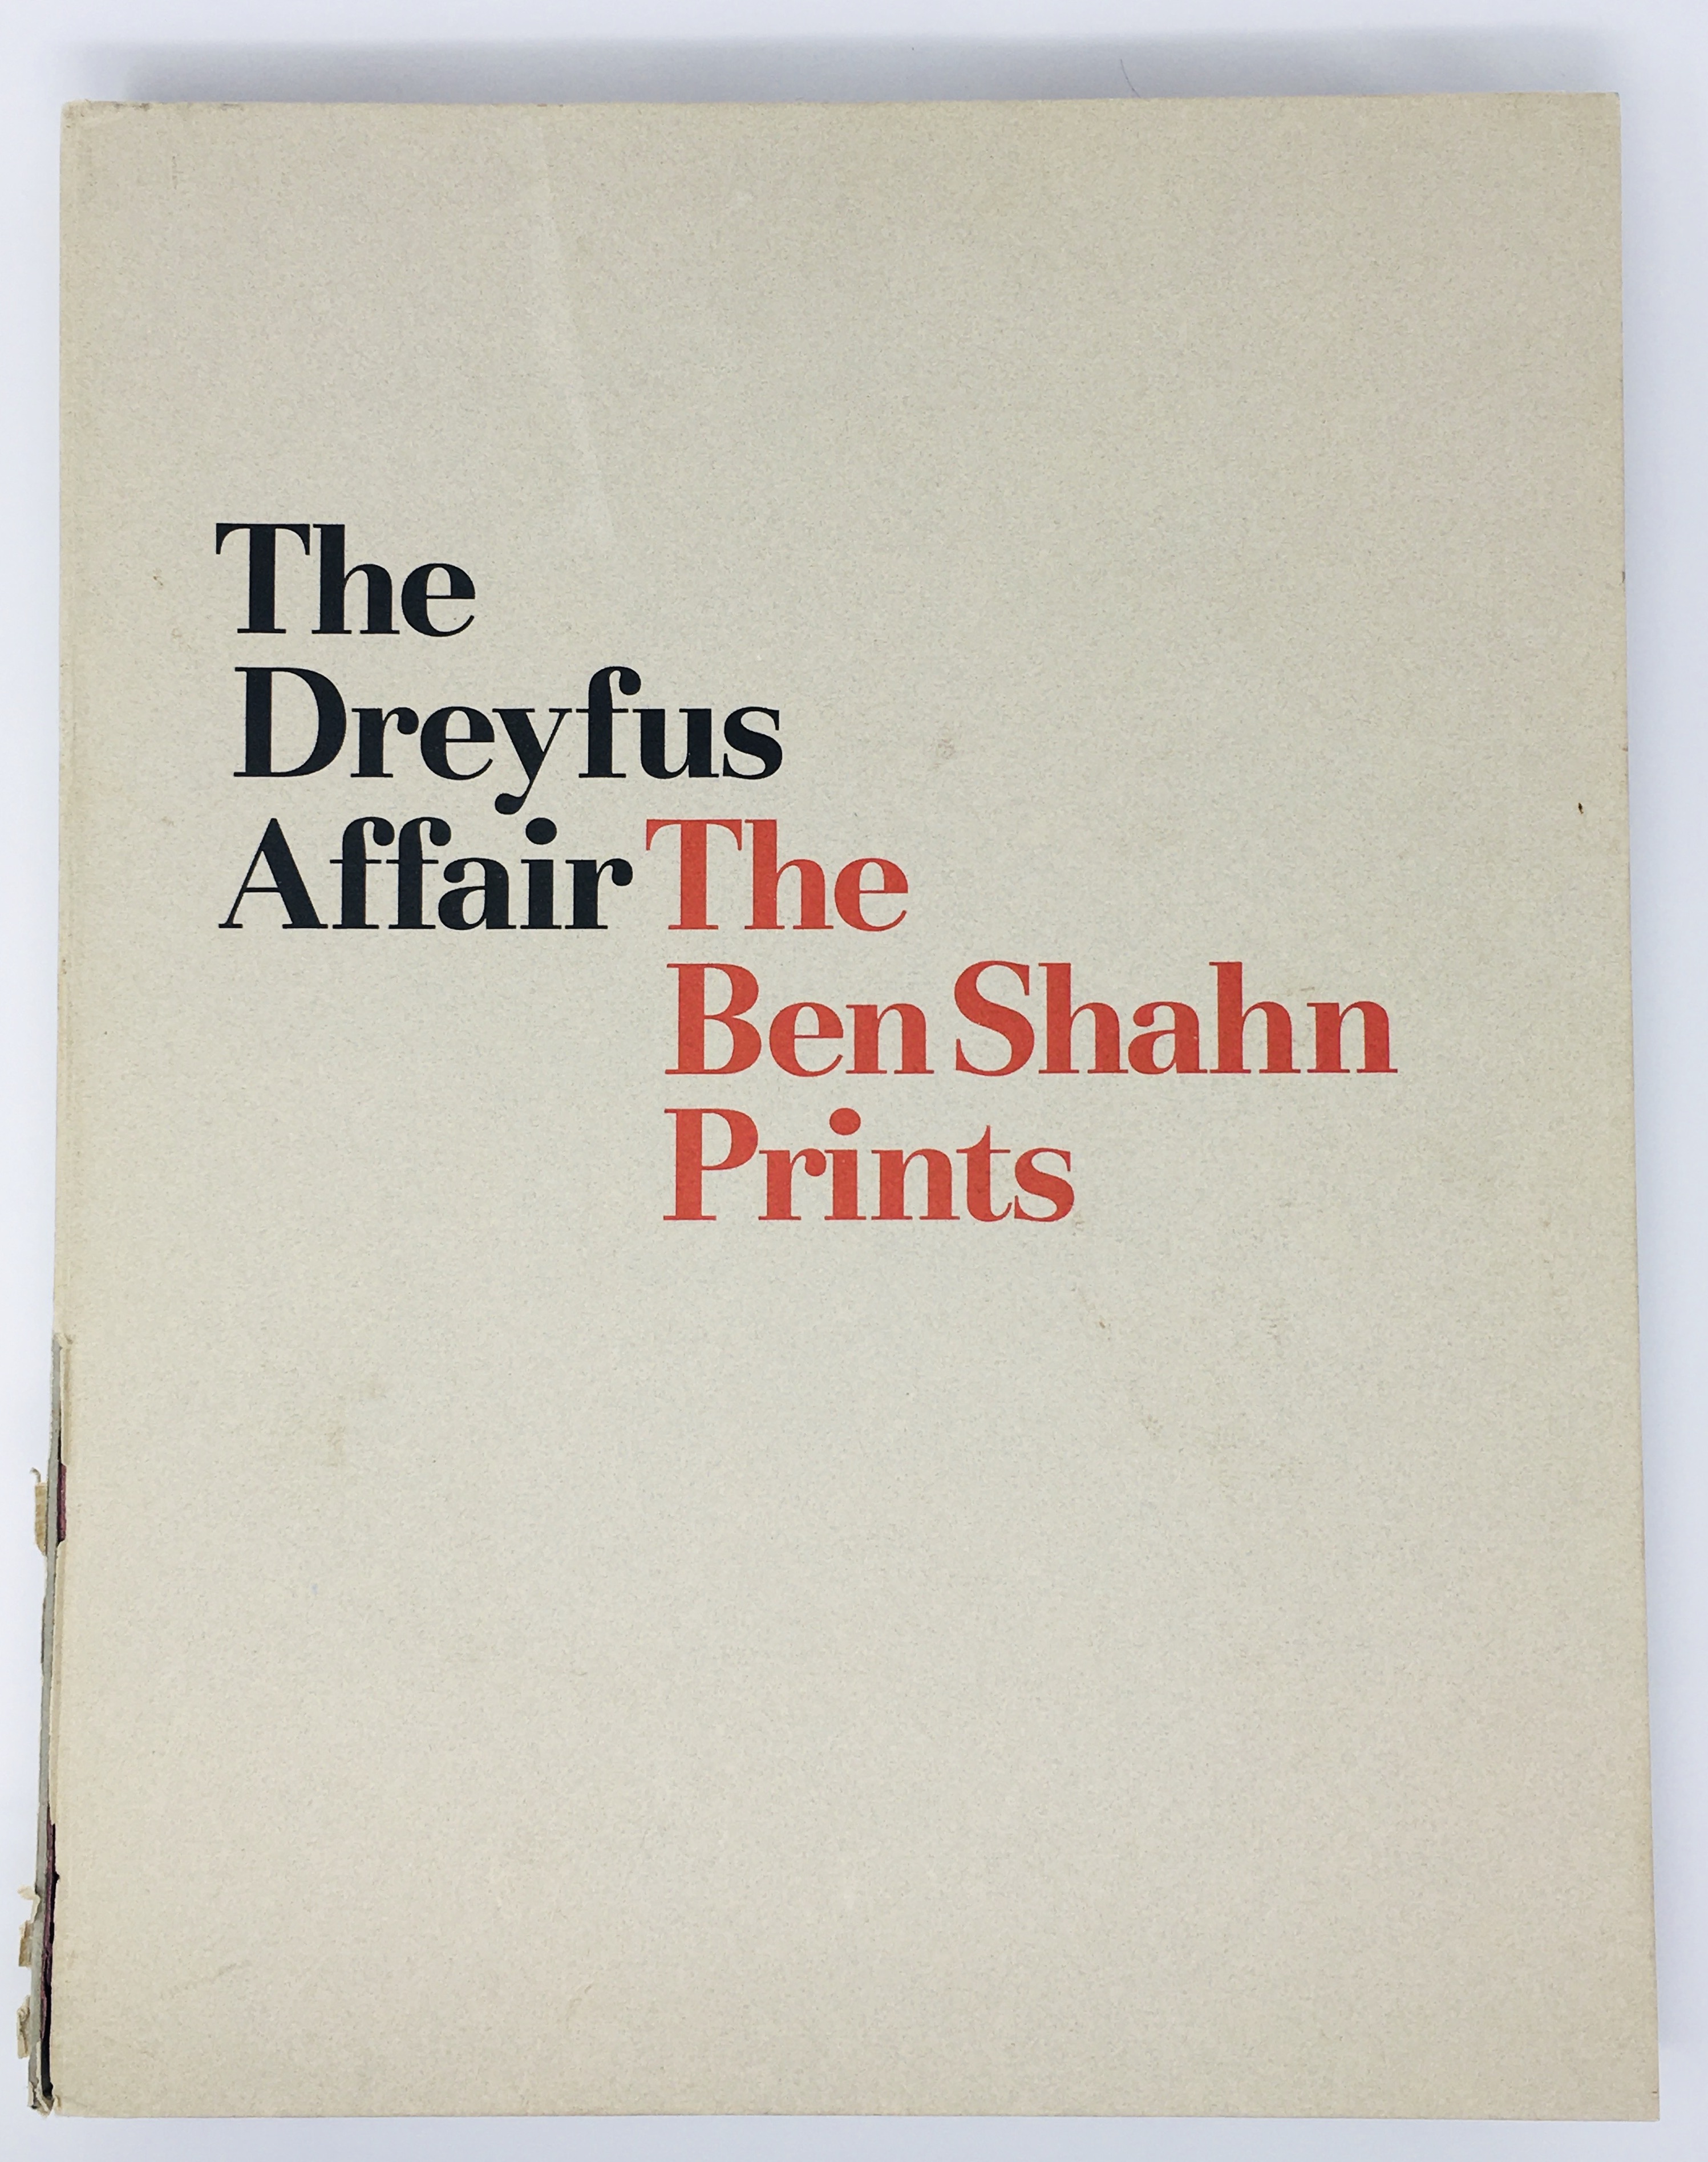 Dreyfus Affair - Book Collection featuring The Ben Shahn Prints (Limited First Edition) - Image 2 of 73